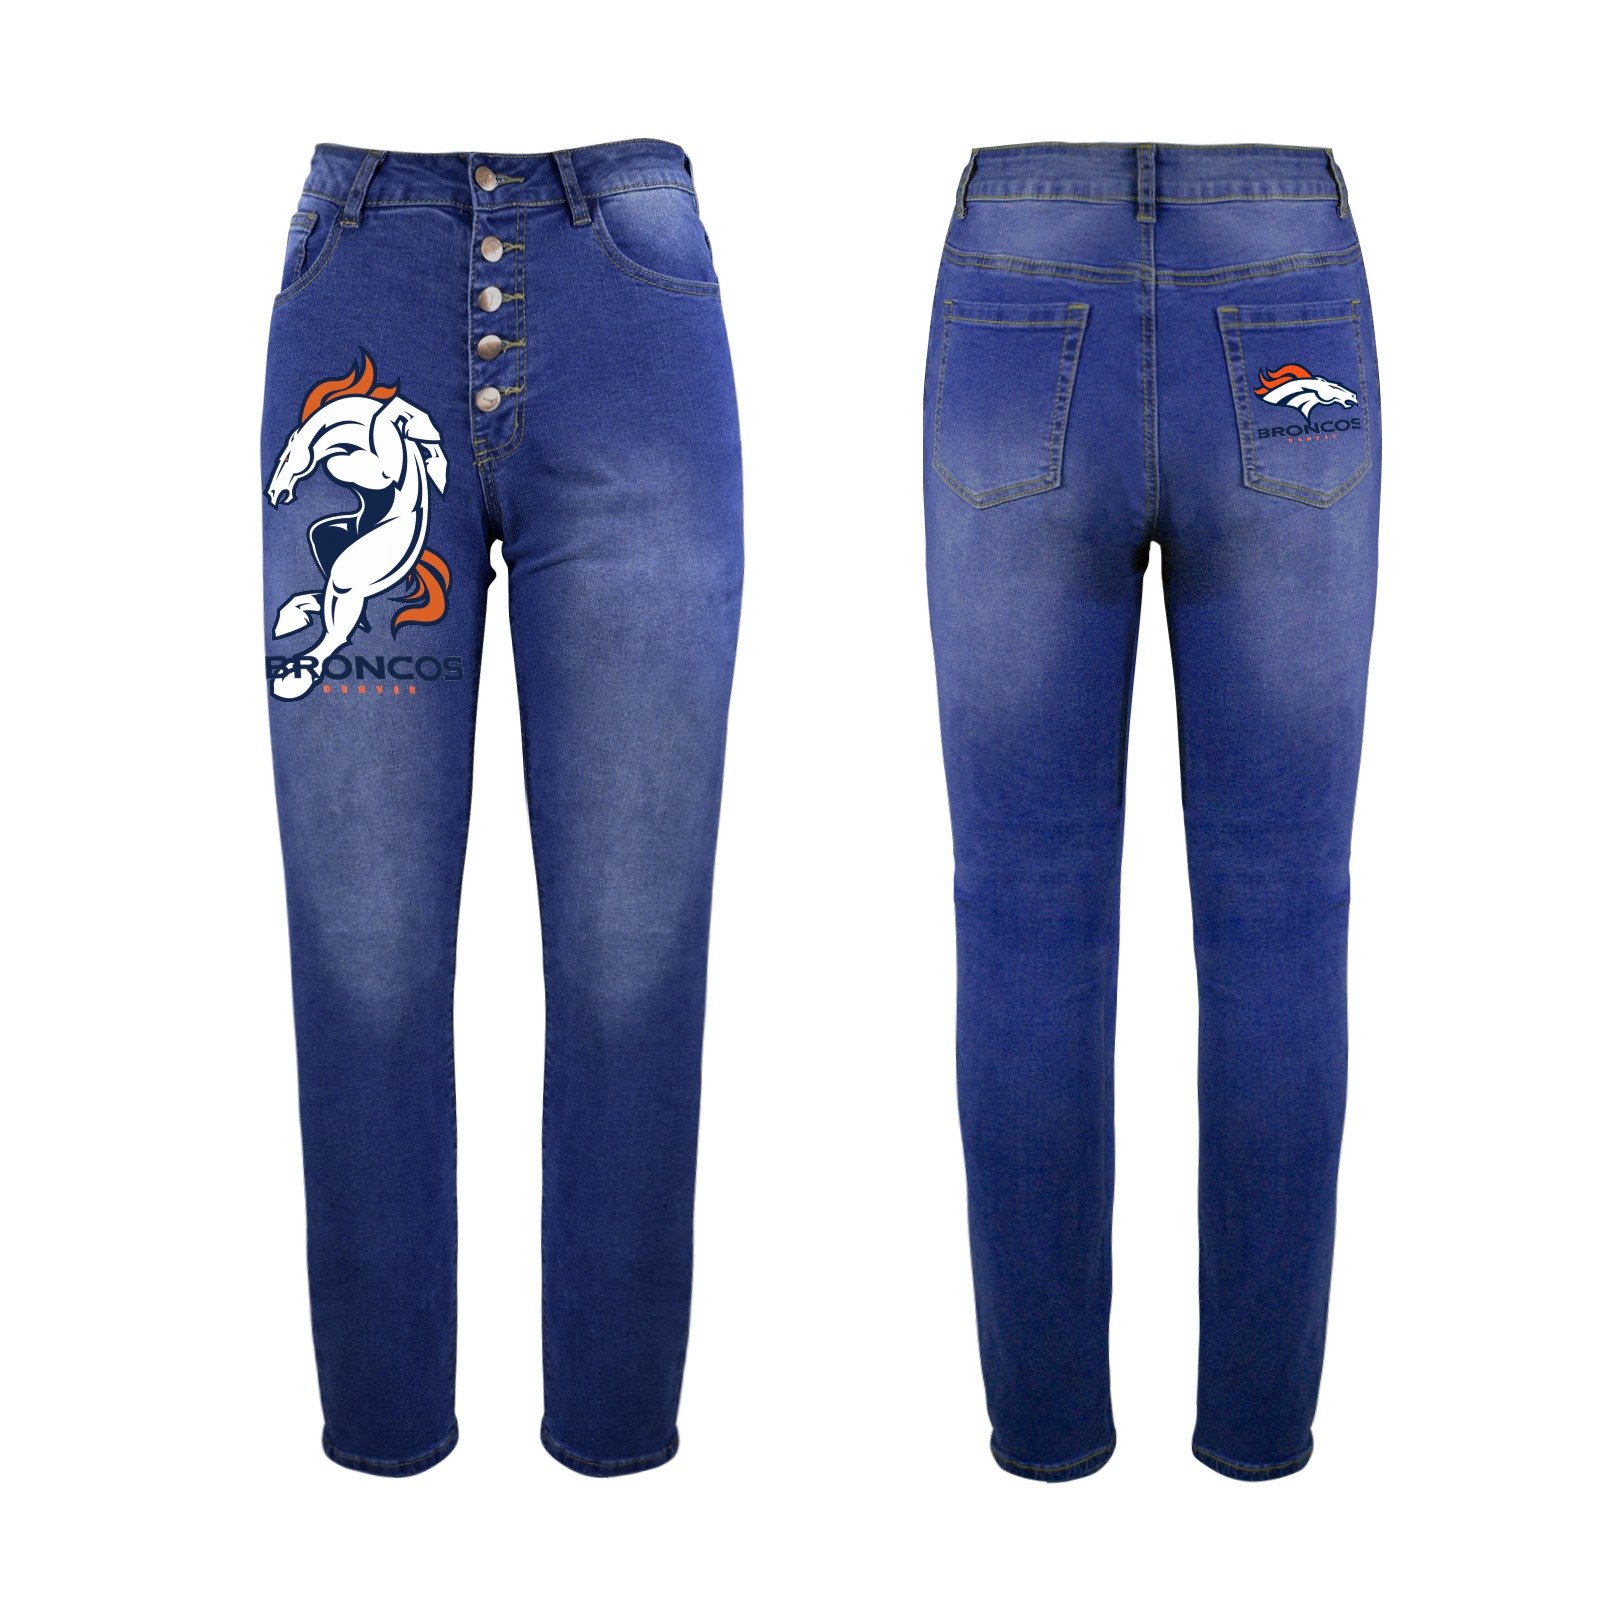 Broncos Full Women's Jeans (Front&Back Printing)